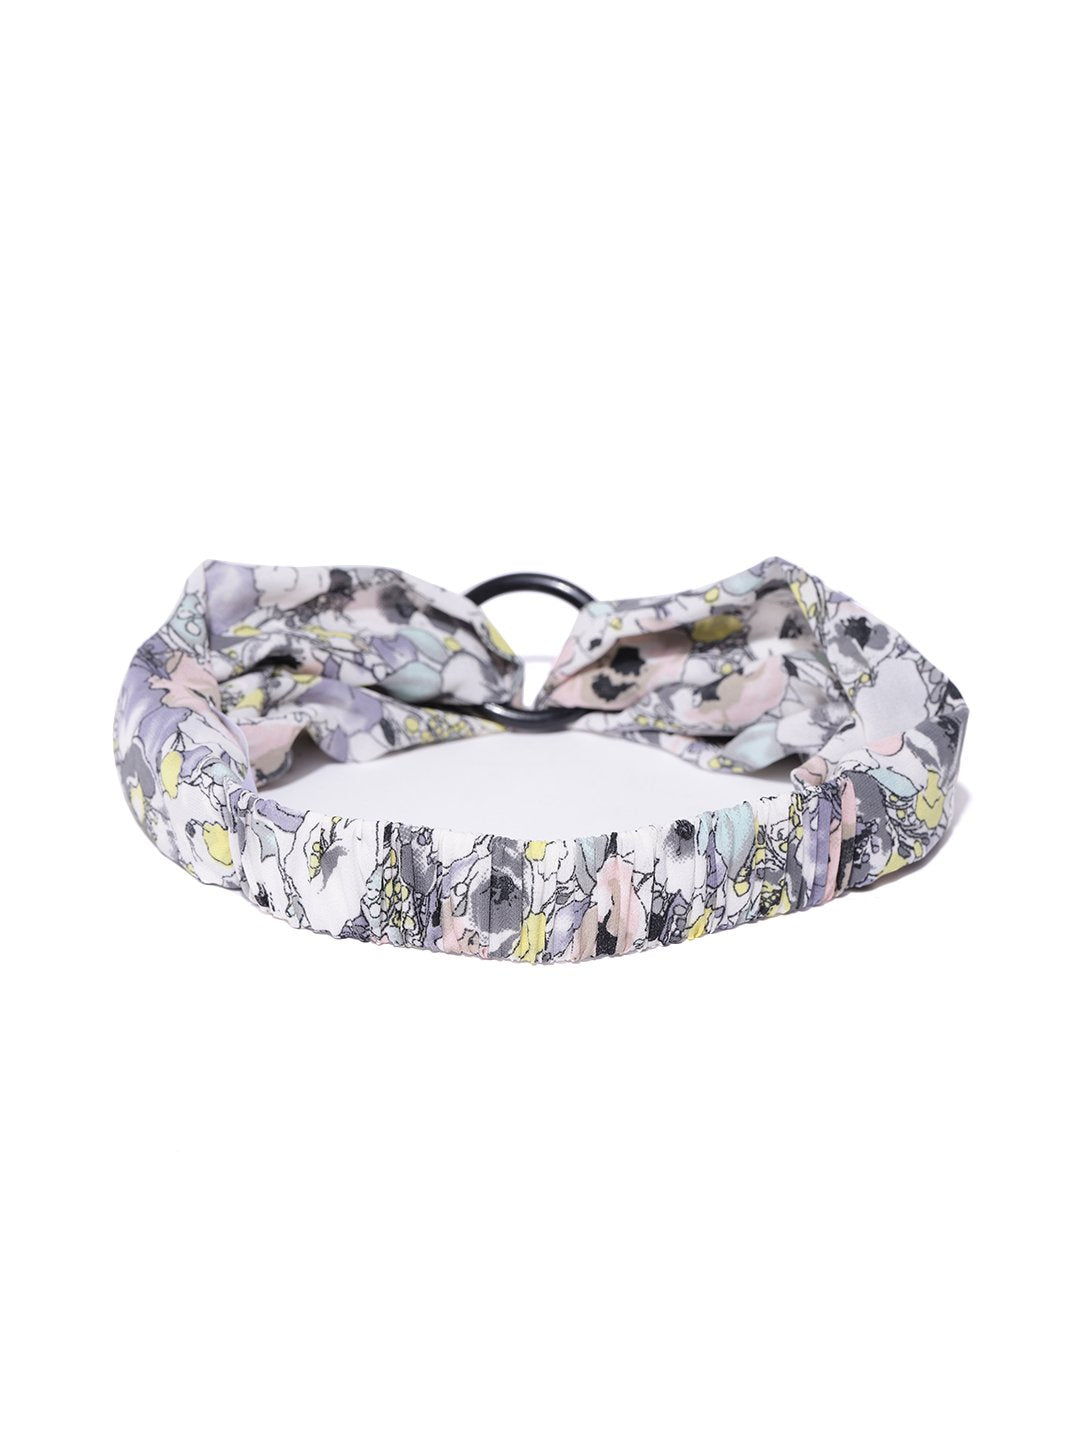 Blueberry multi colour floral print knot detailing hair band